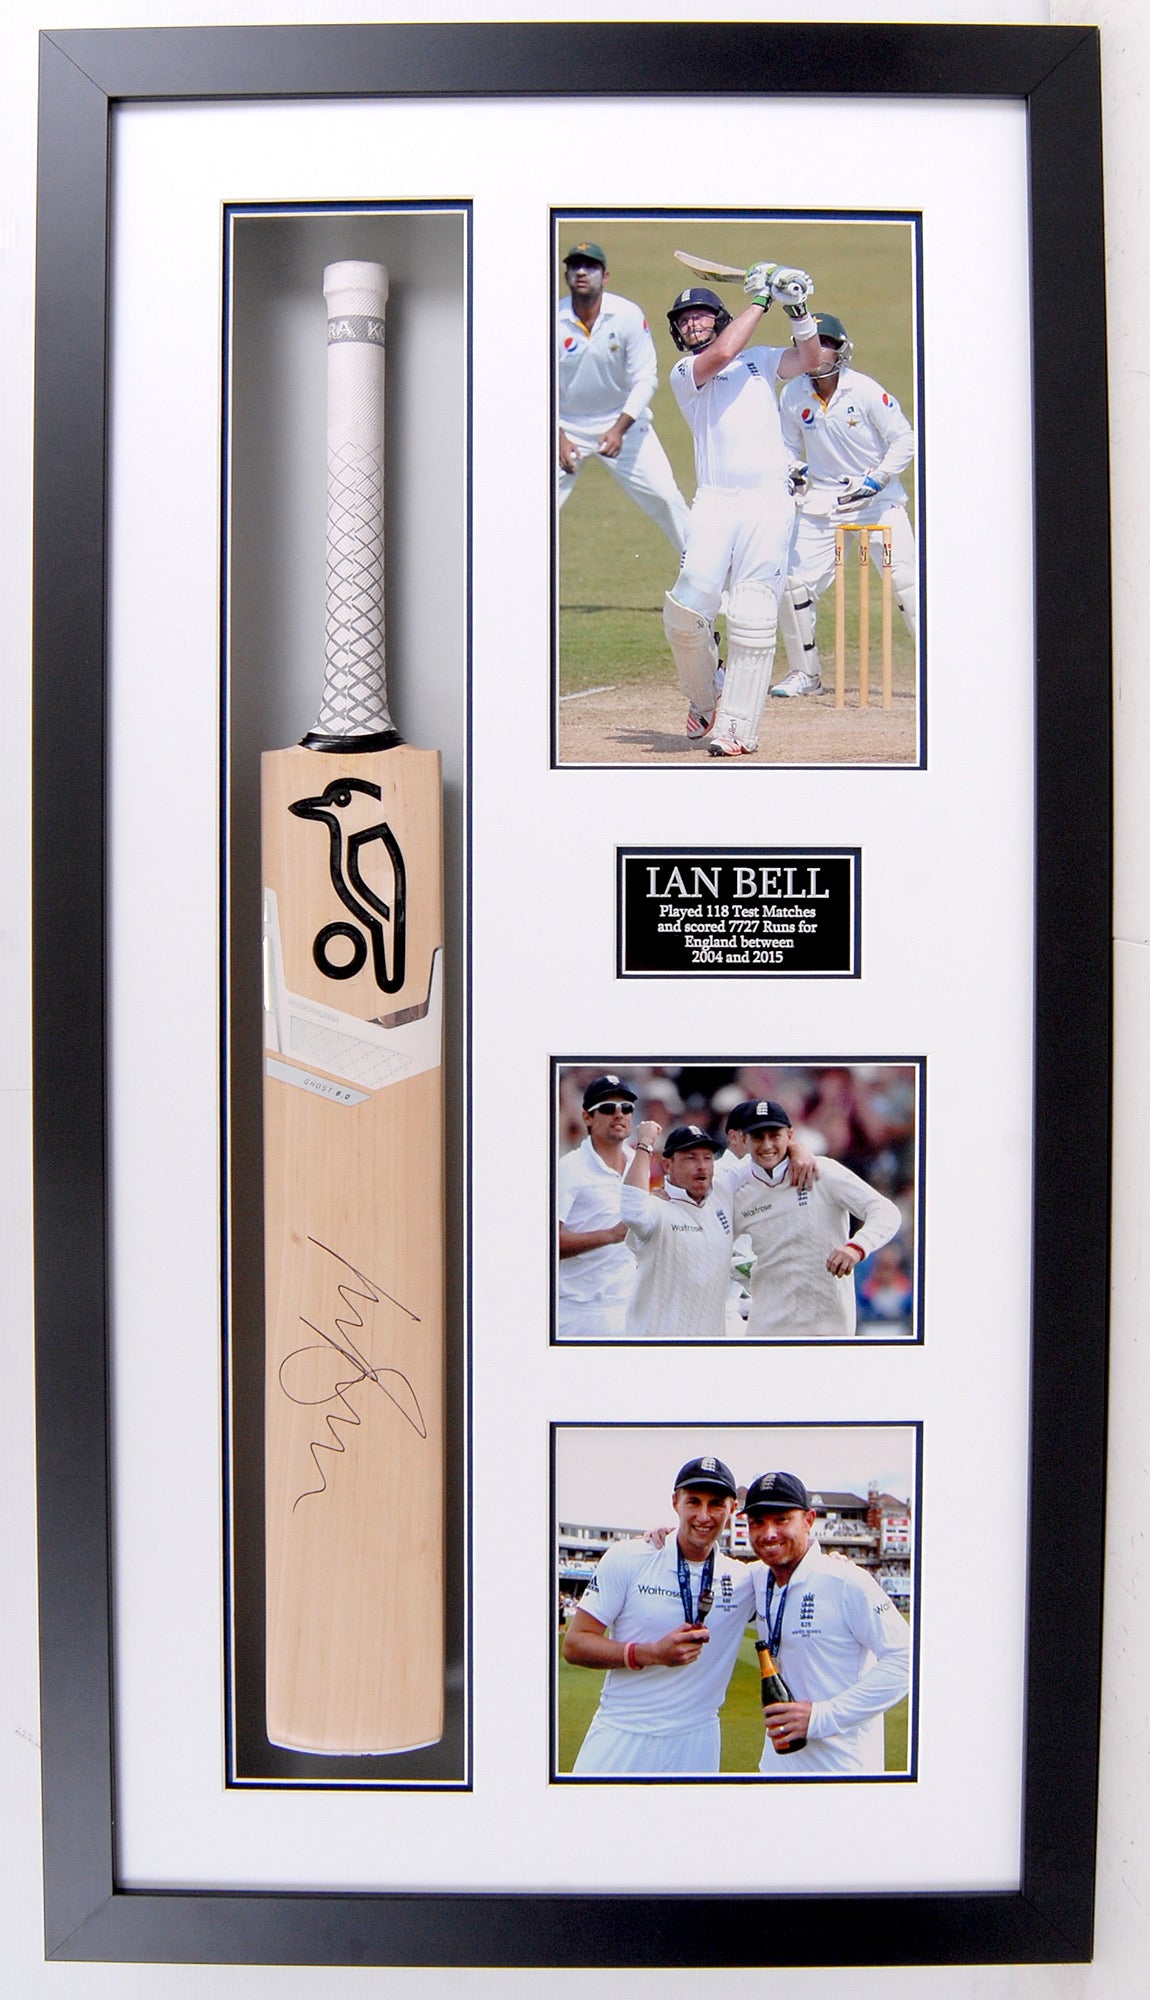 Ian Bell Signed and Framed Cricket Bat - with full COA